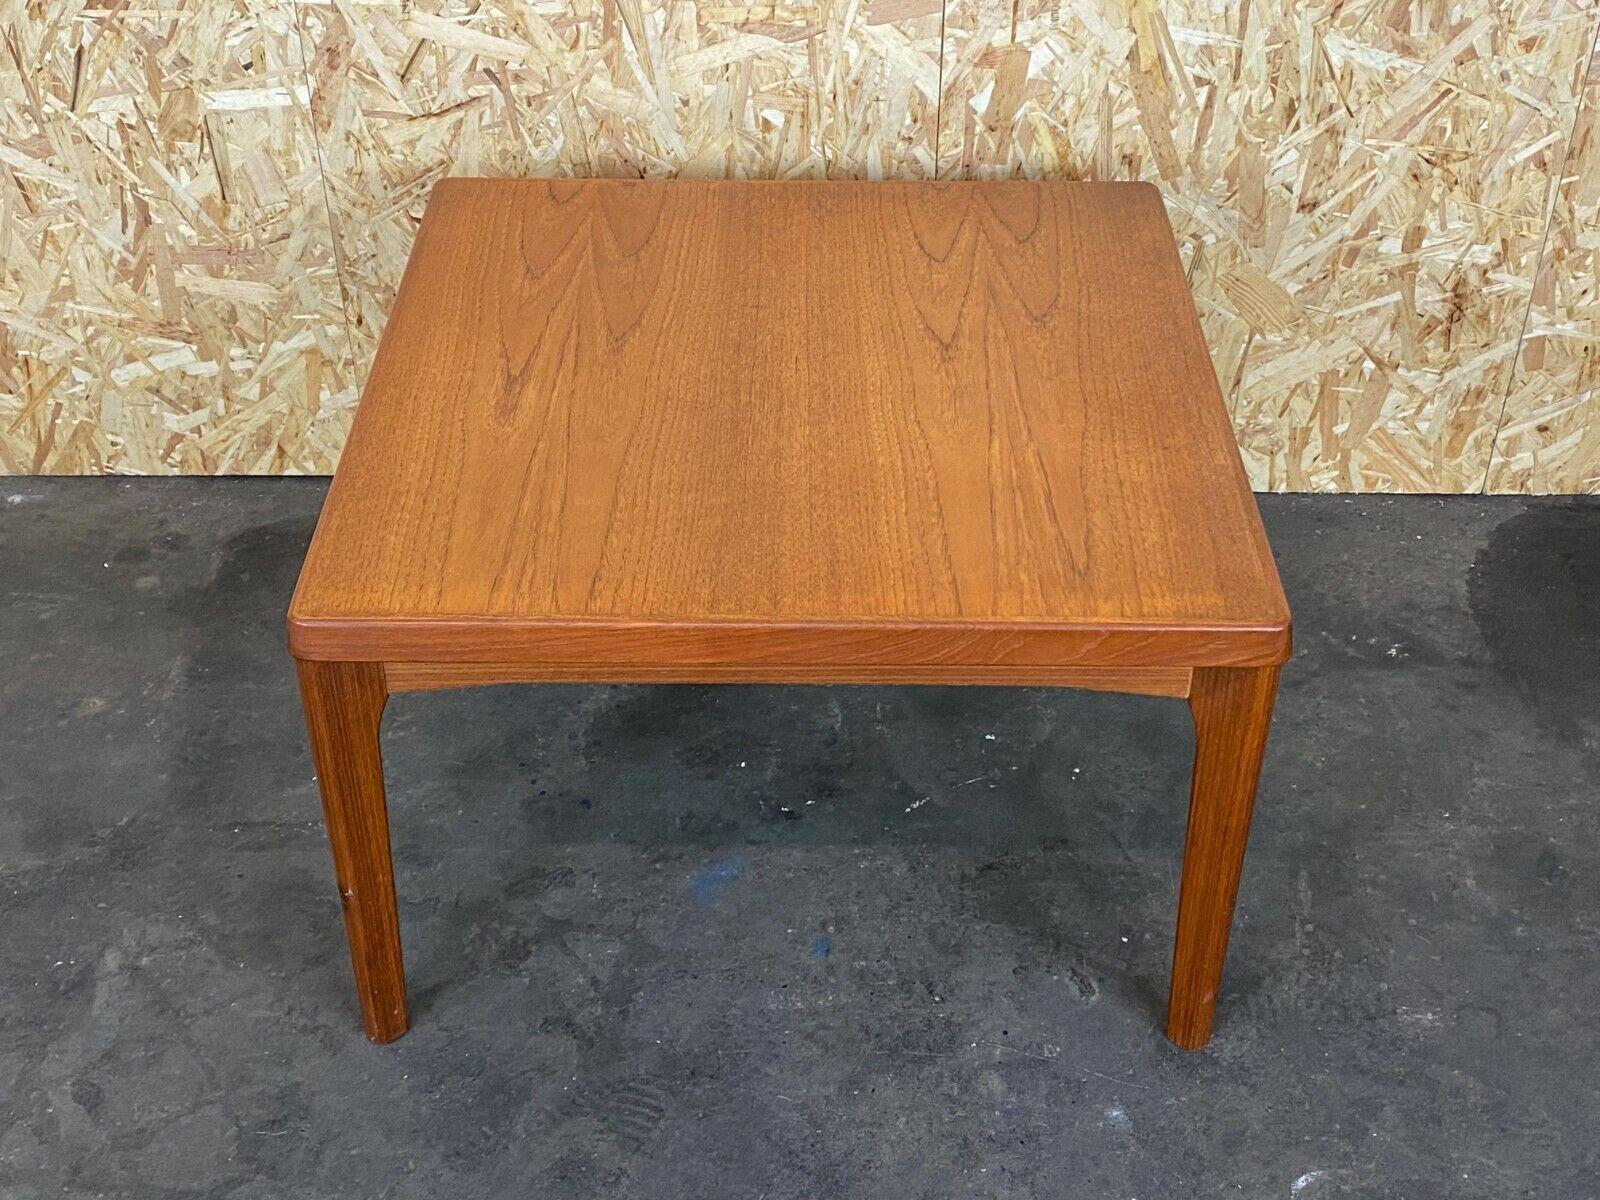 60s 70s Teak table coffee table coffee table Henning Kjaernulf Design 70s

Object: coffee table / side table

Manufacturer: Henning Kjaernulf

Condition: good

Age: around 1960-1970

Dimensions:

69cm x 69cm x 44cm

Other notes:

The